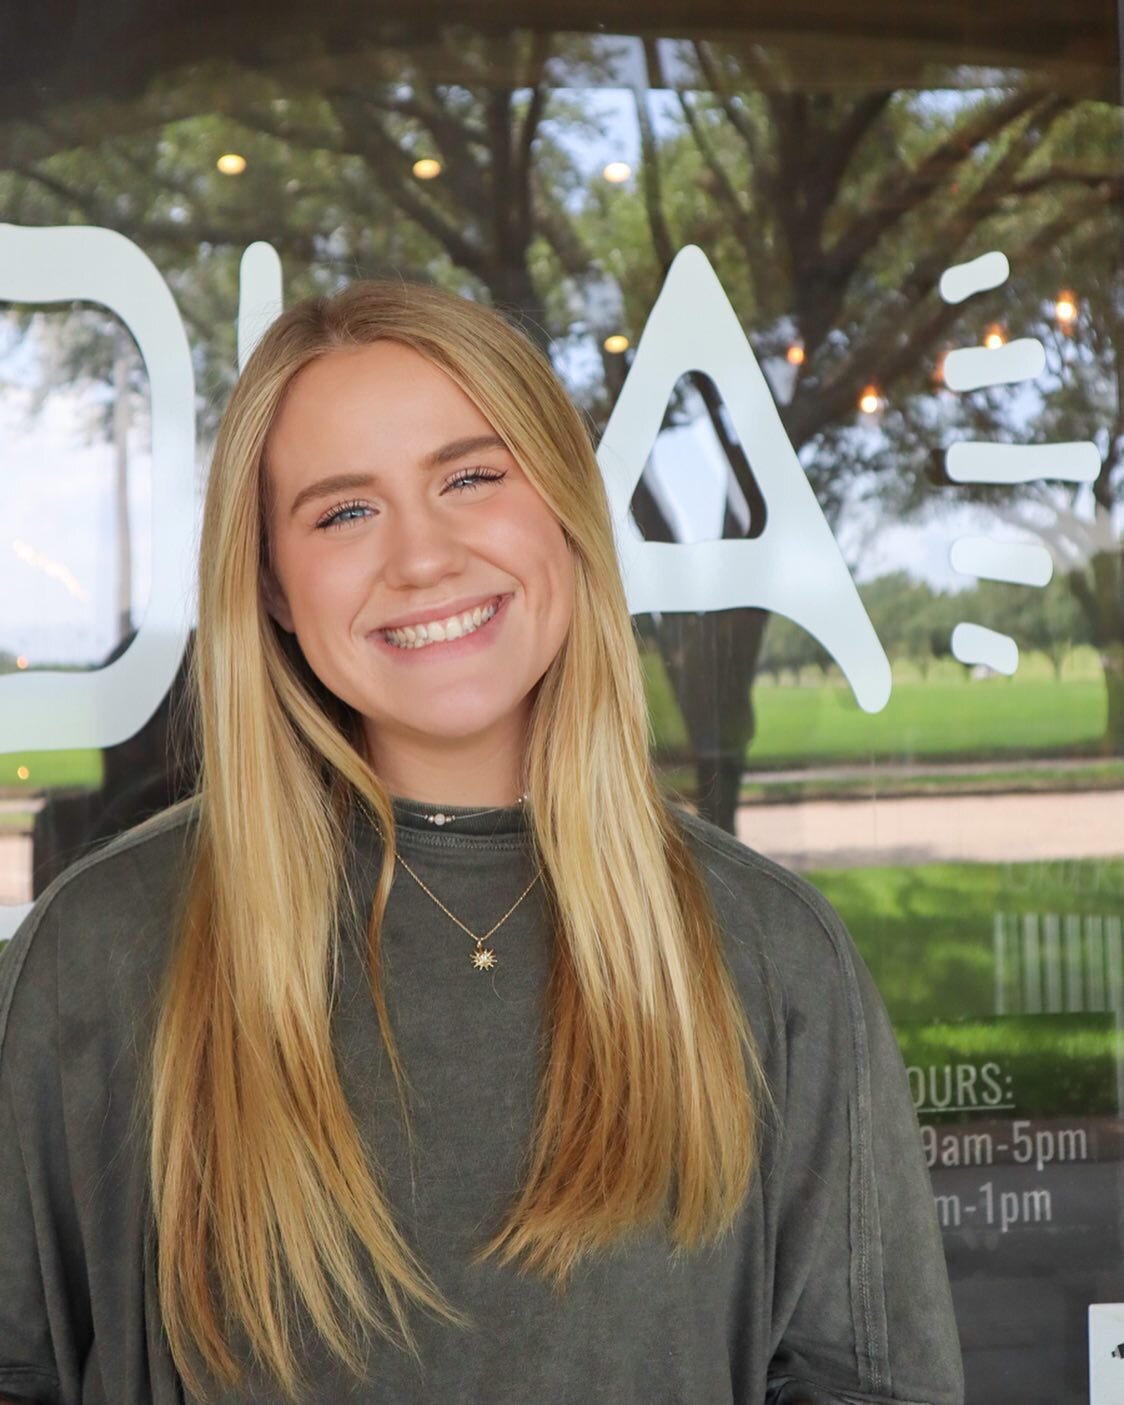 Family groups start next Thursday, and we wanted to introduce you to our leaders for this fall!

Meet Shelby, a senior Biochemistry major and biology minor. She is involved all around the community, and loves to meet new people. You can find her serv